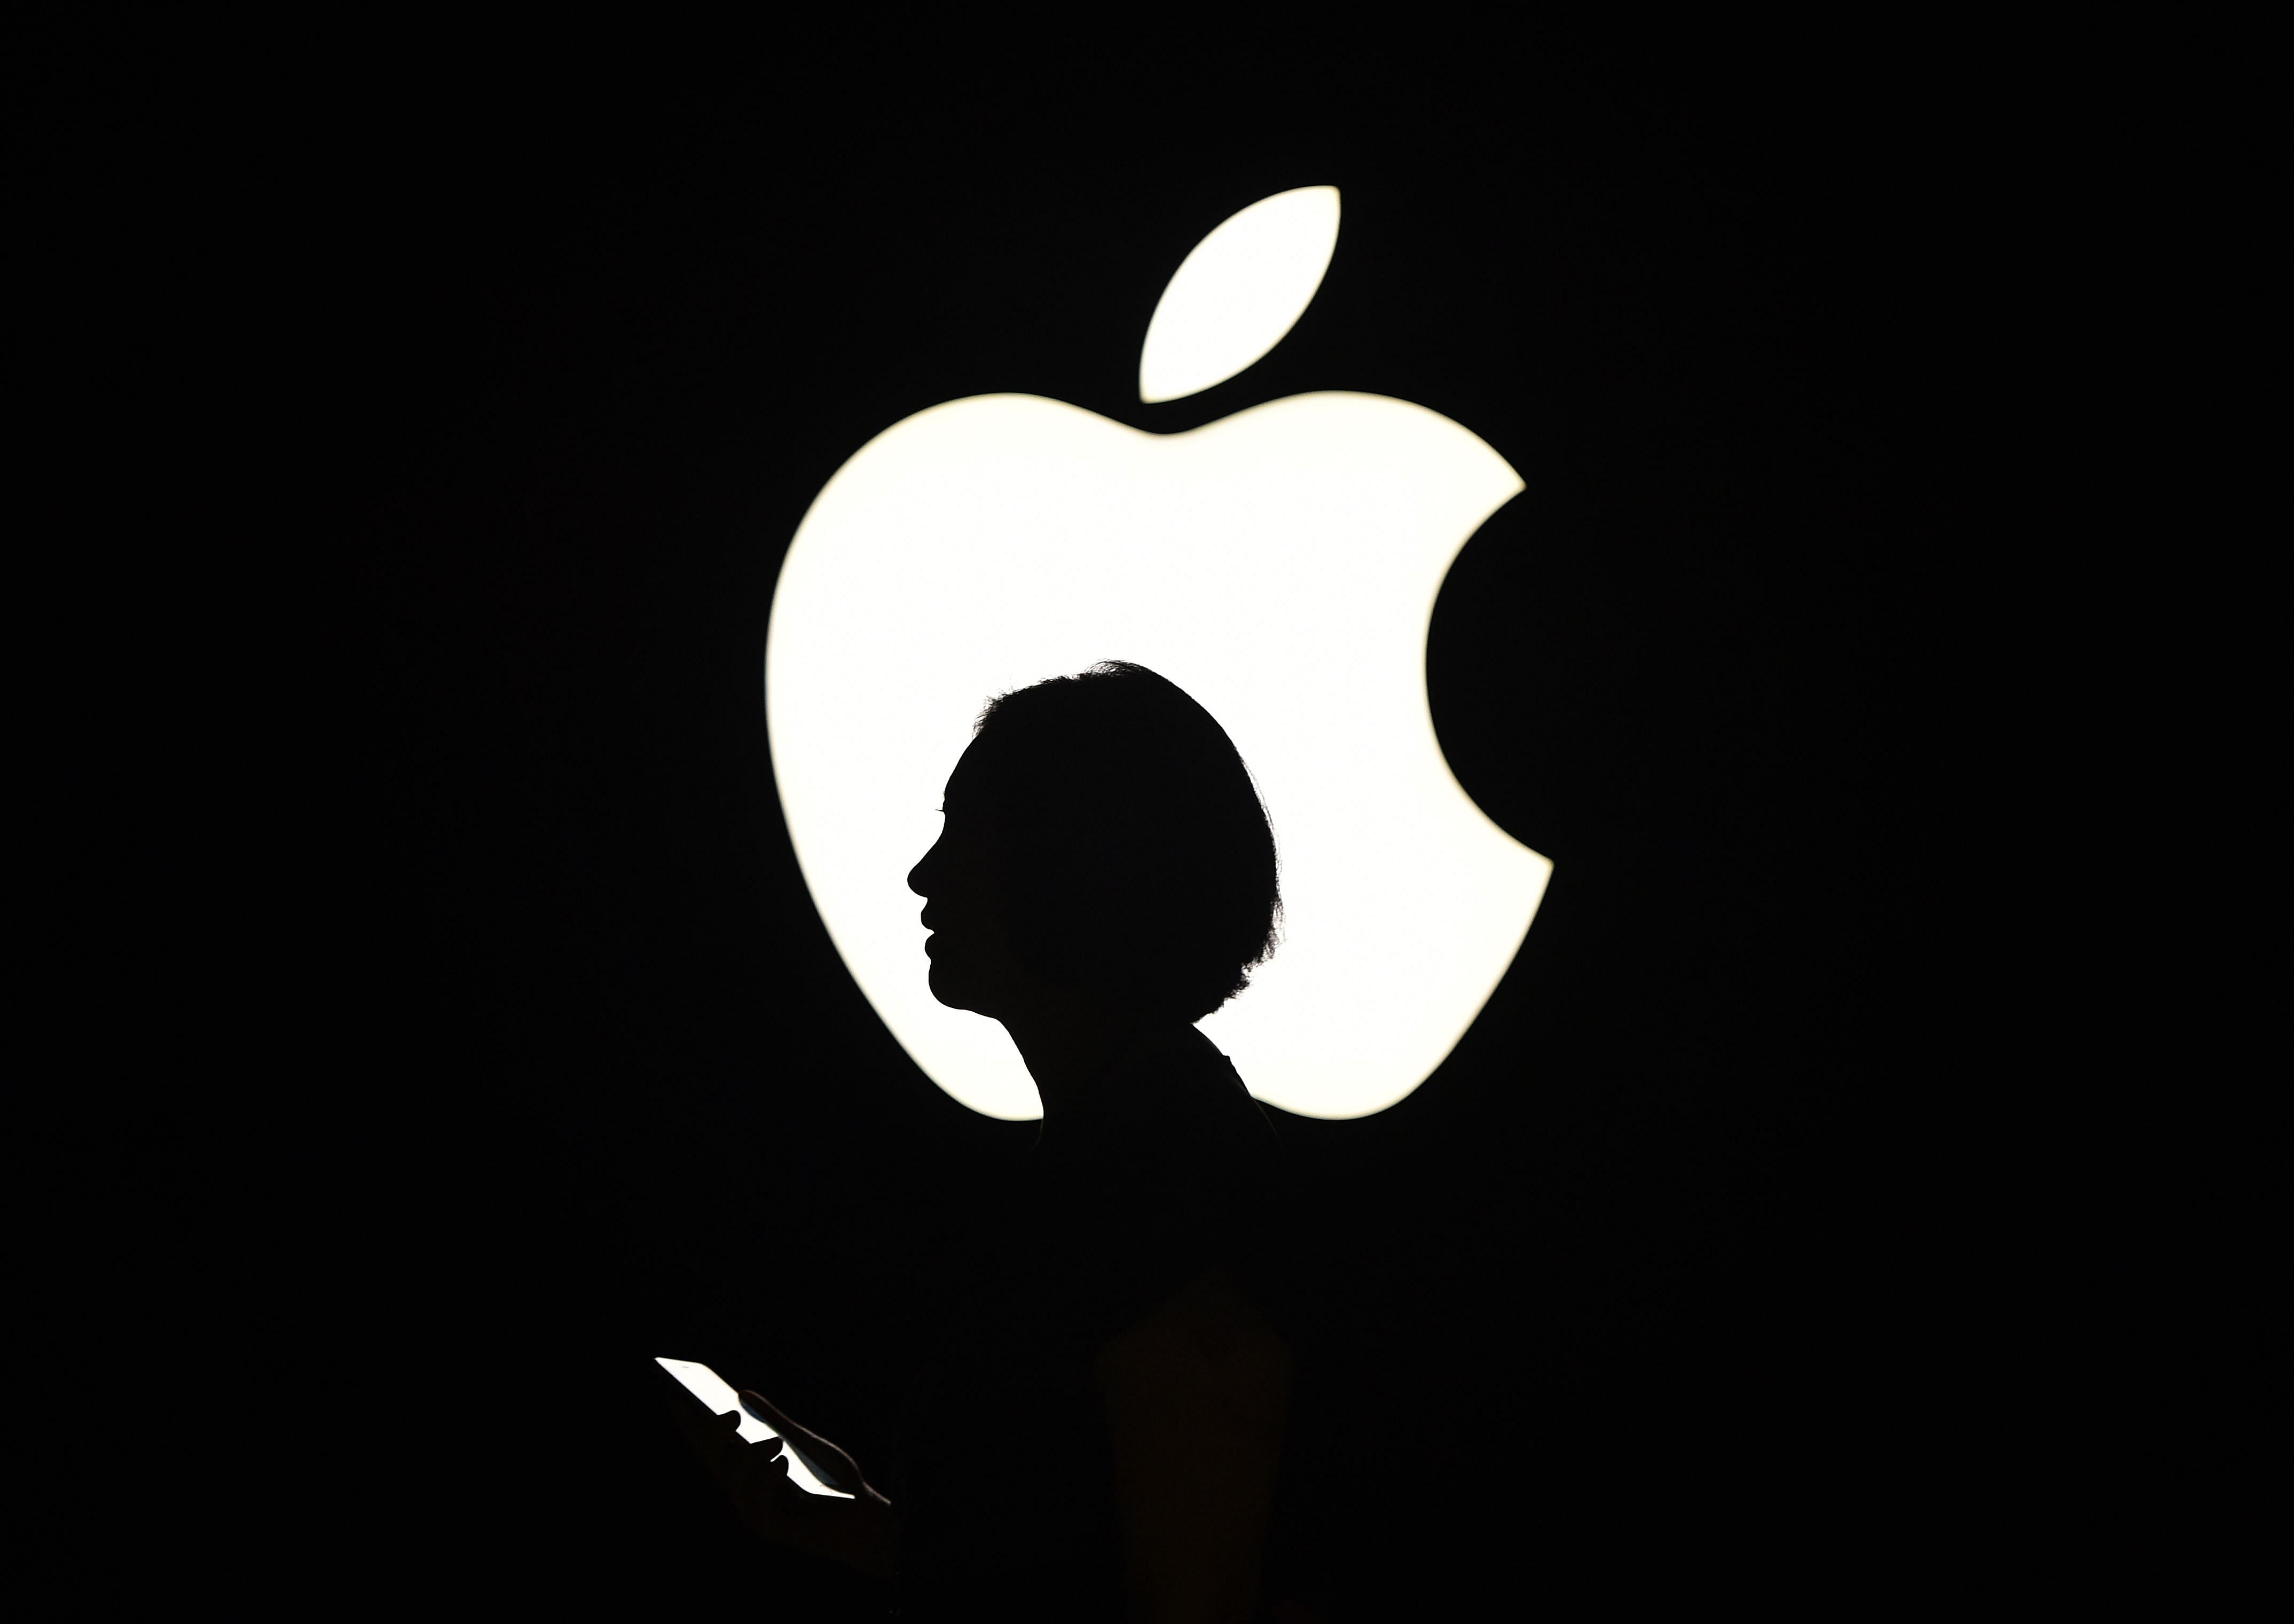  Apple Inc said on Friday it suspended its global program where it analyzed recordings from users interacting with its voice assistant Siri. (AFP Photo)